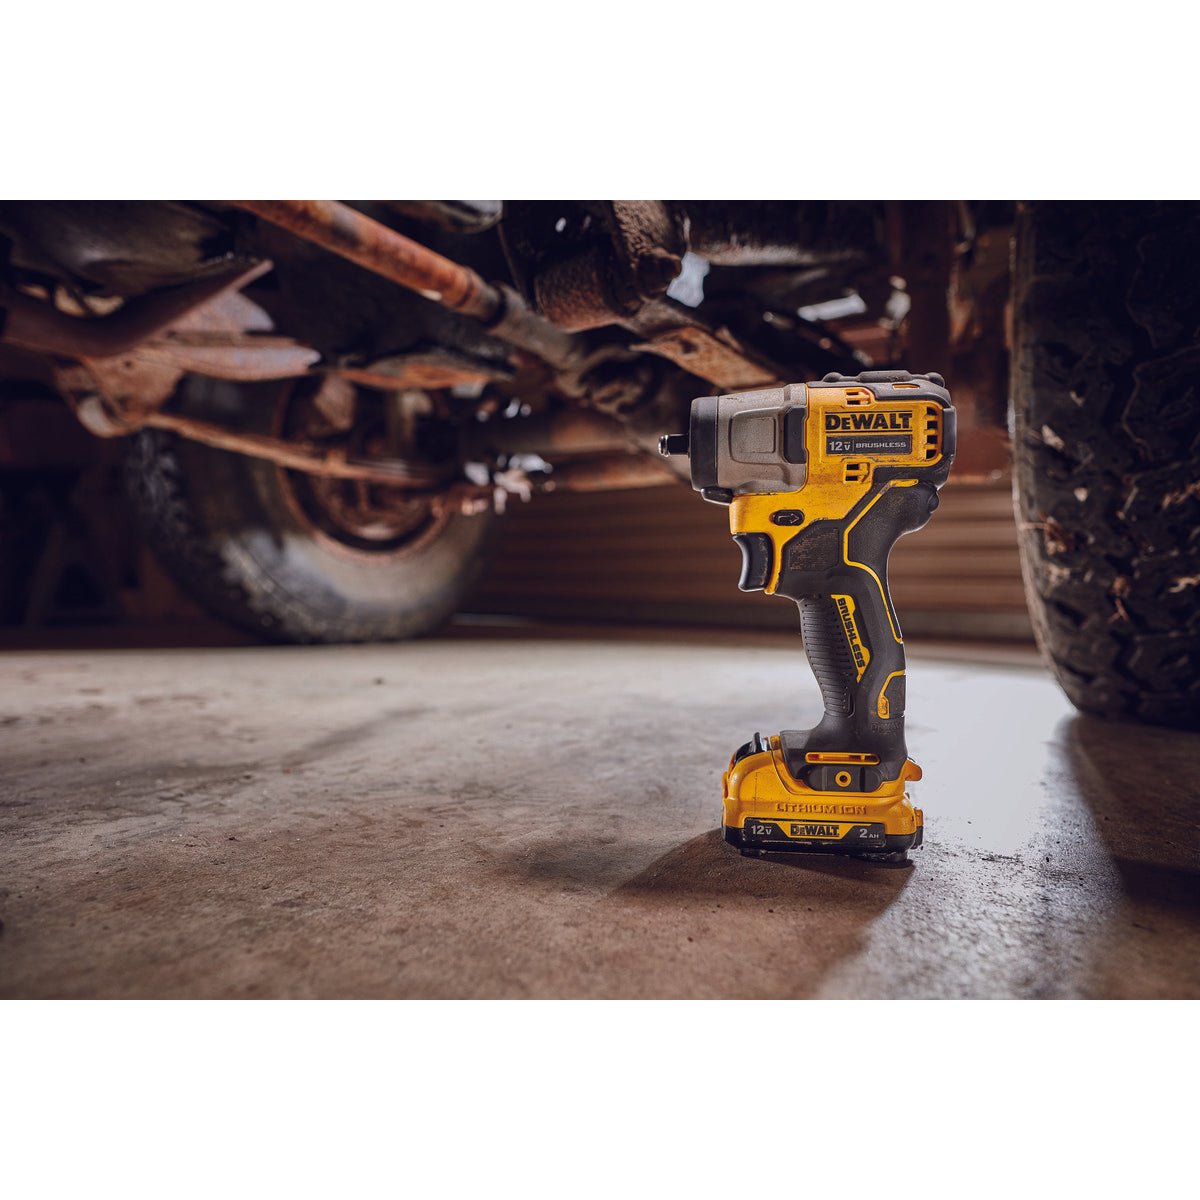 DEWALT DCF902B - XTREME™ 12V MAX* BRUSHLESS 3/8 IN. CORDLESS IMPACT WRENCH (TOOL ONLY)